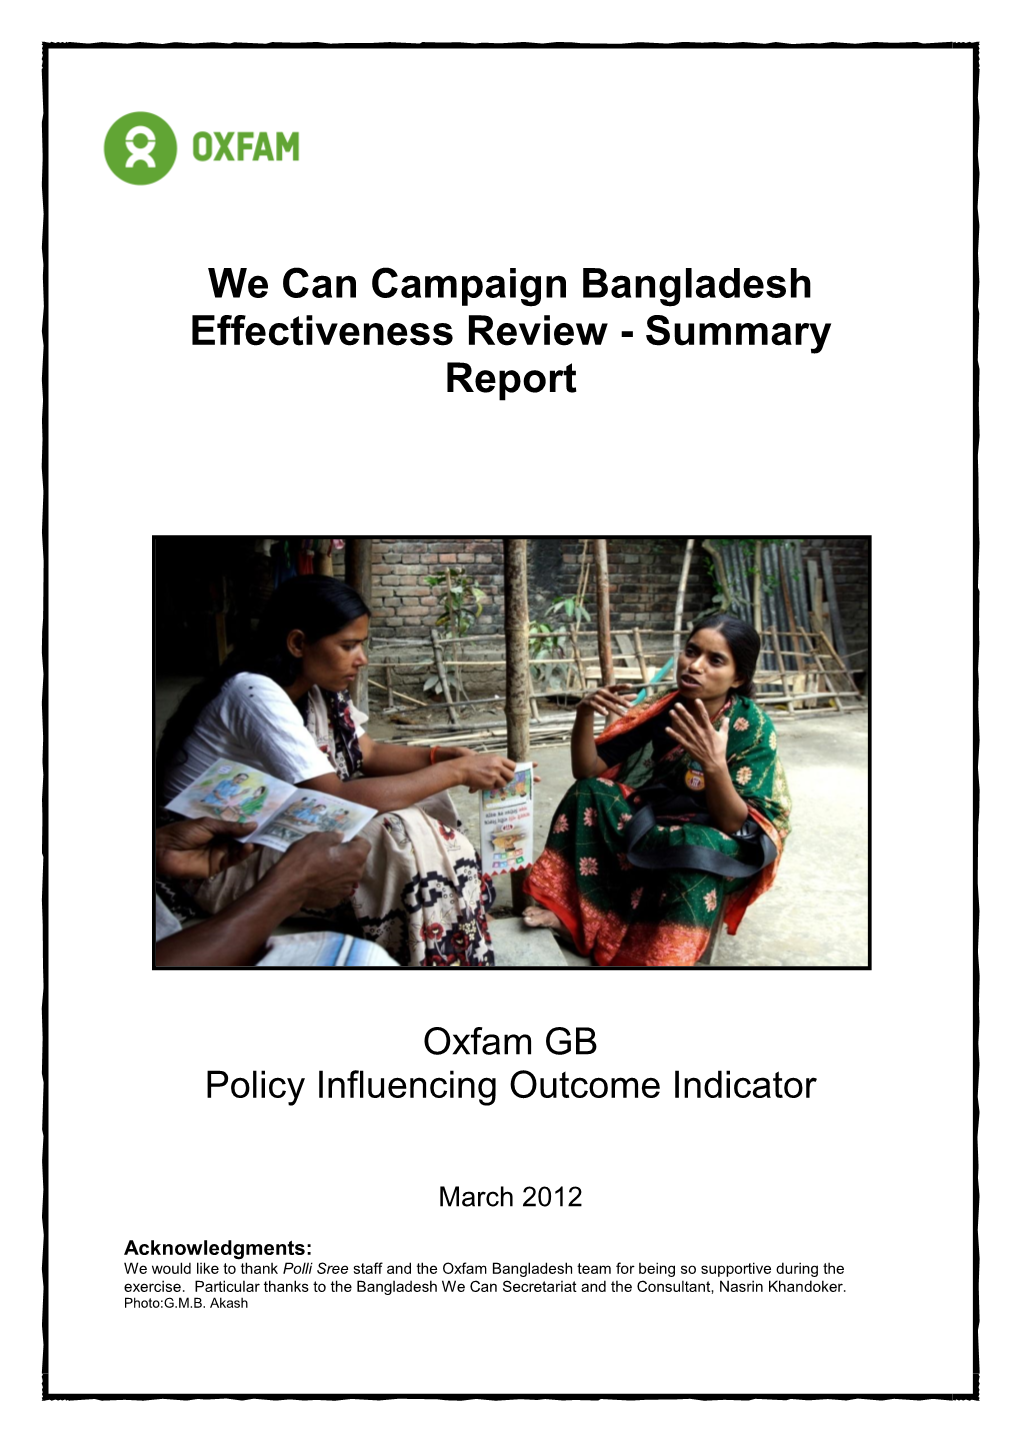 We Can Campaign Bangladesh Effectiveness Review - Summary Report